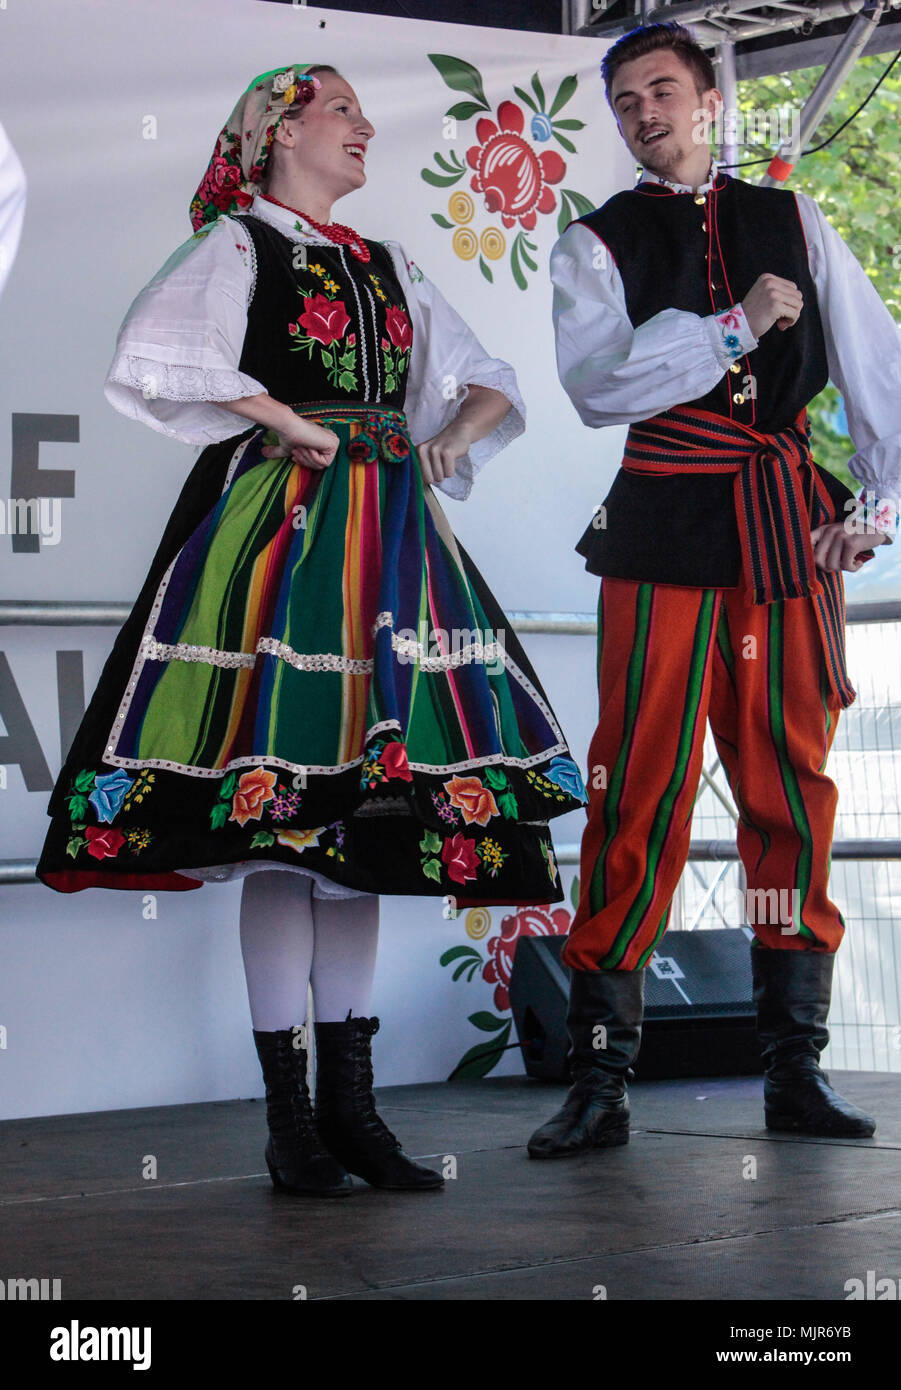 London Uk 06 May 2018 The Biggest Polish Festival In The